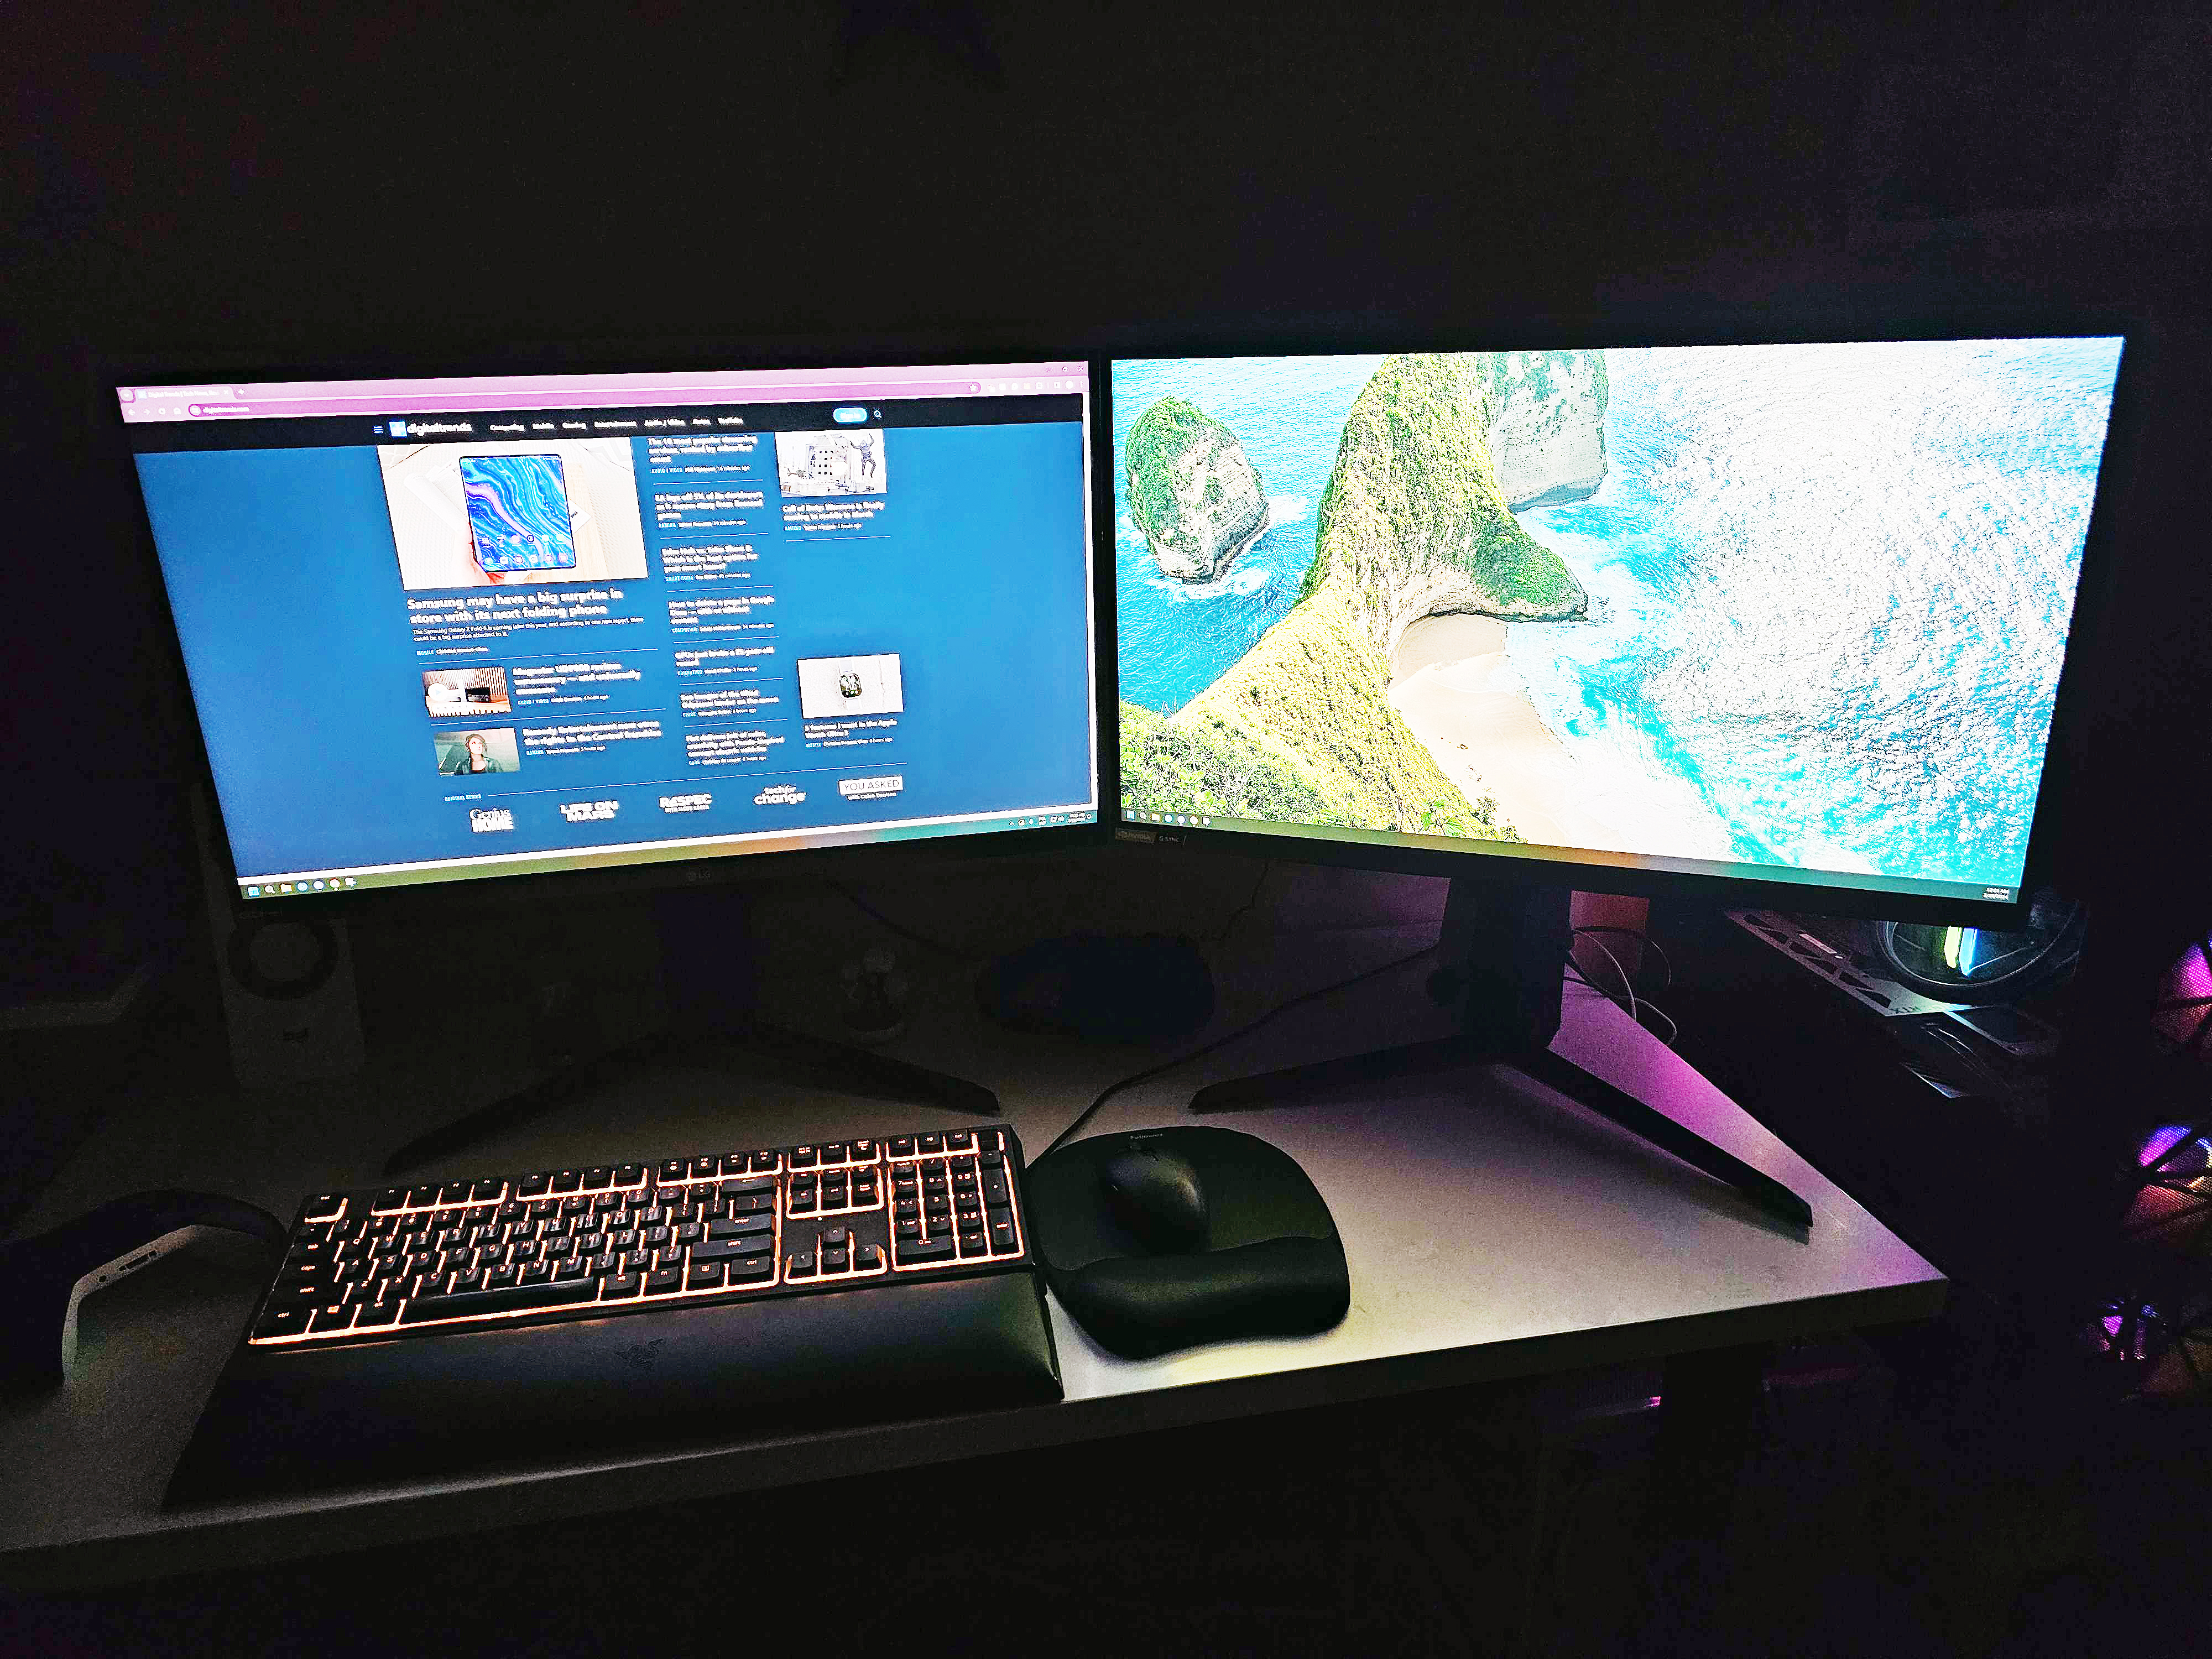 Two LG UltraGear monitors sit on a desk in front of a dark background.